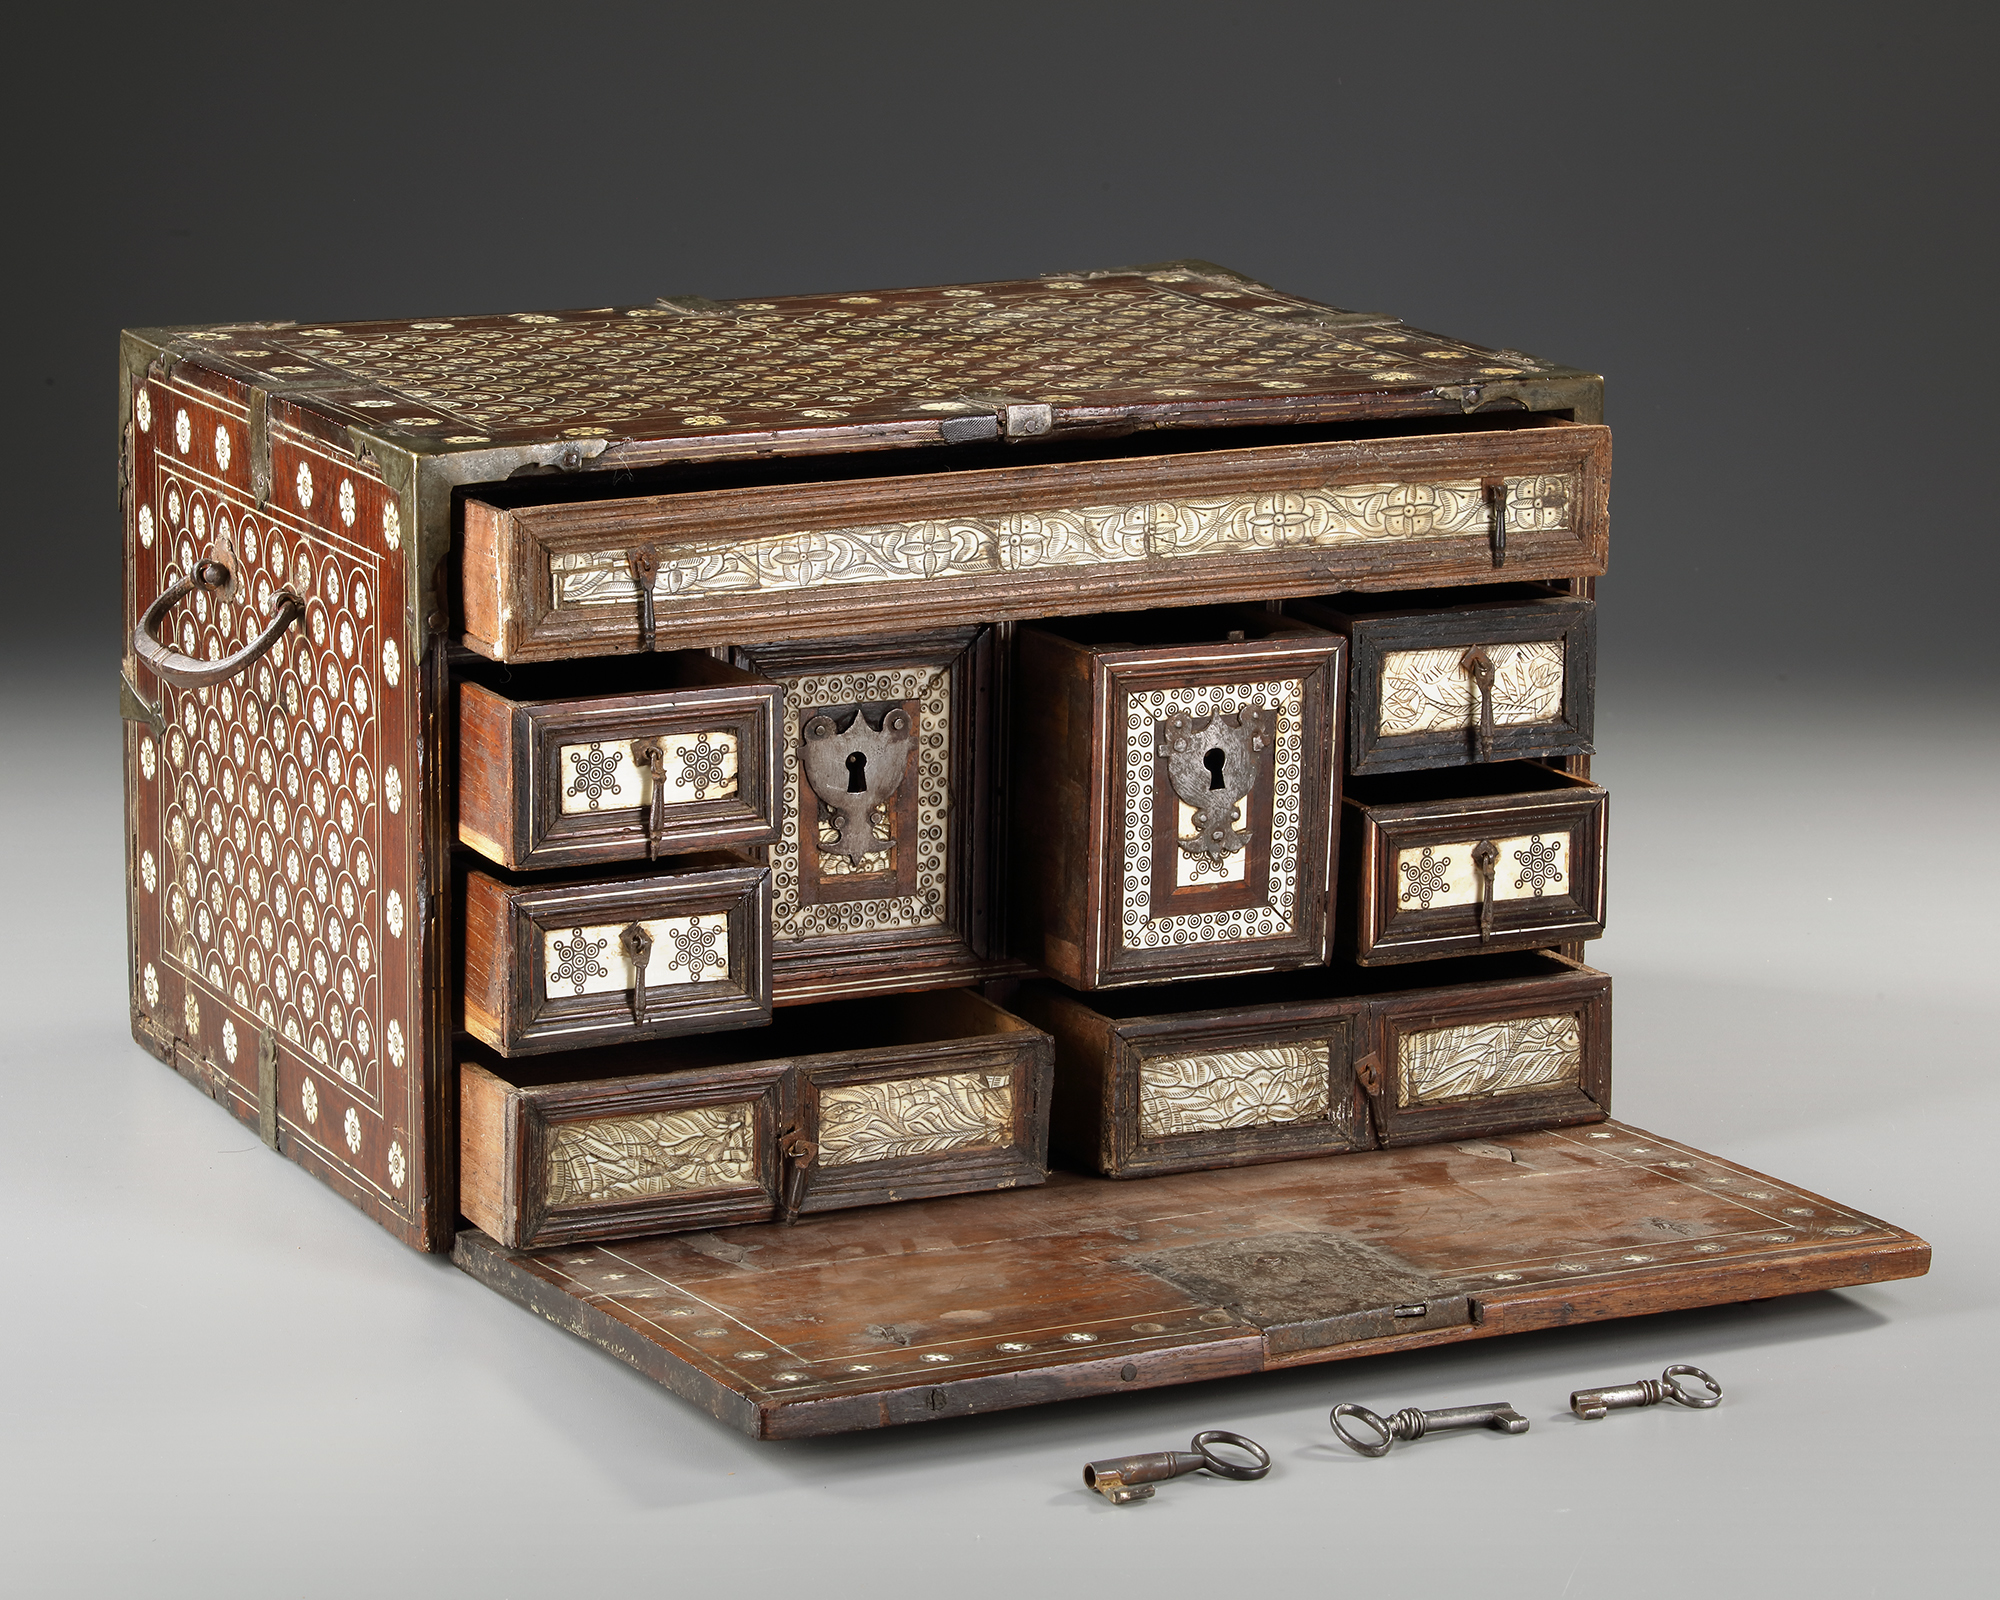 AN INDO-PORTUGUESE WOODEN AND BONE INLAID CHEST, GOA, 17TH CENTURY - Image 5 of 10